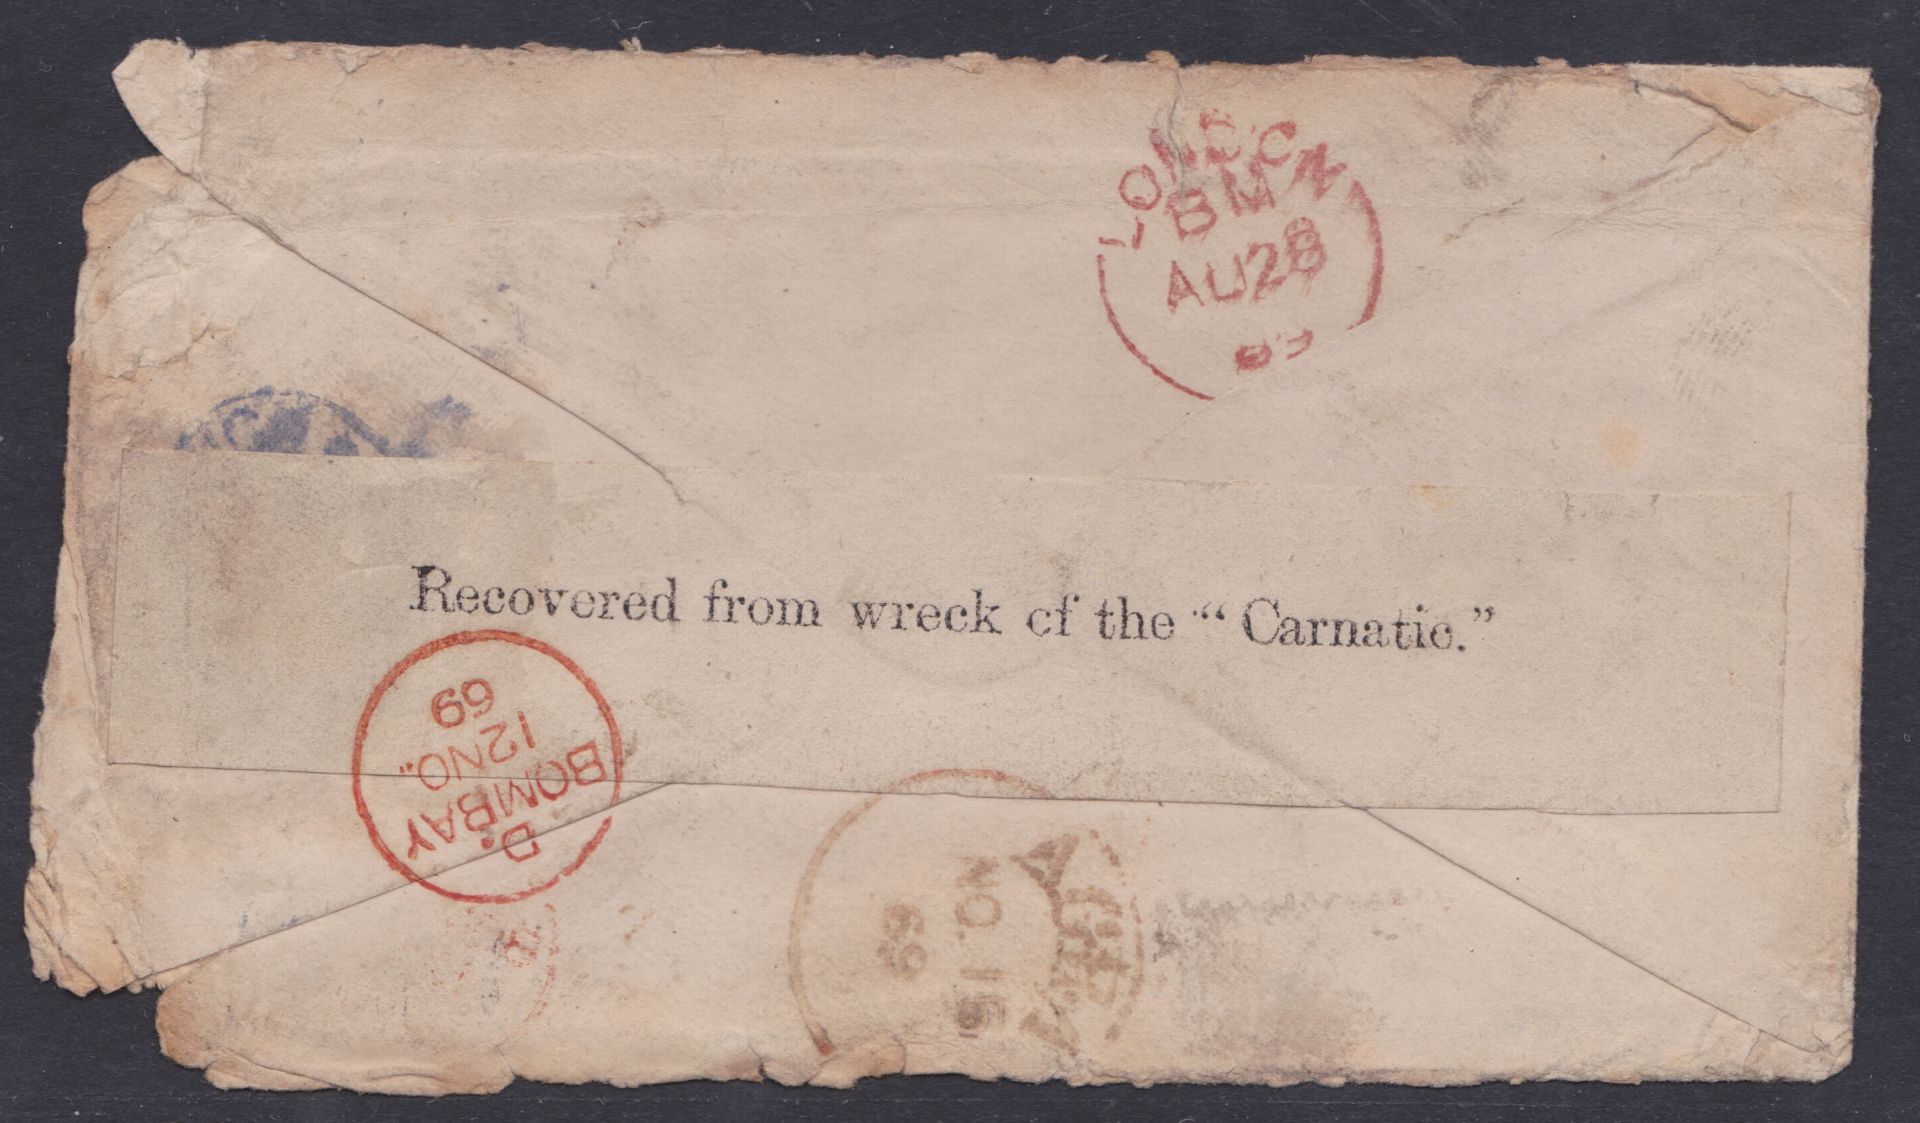 CRASH & WRECK 1869 - Cover from Paisley to India, water damaged and the stamp washed off, the - Image 2 of 2